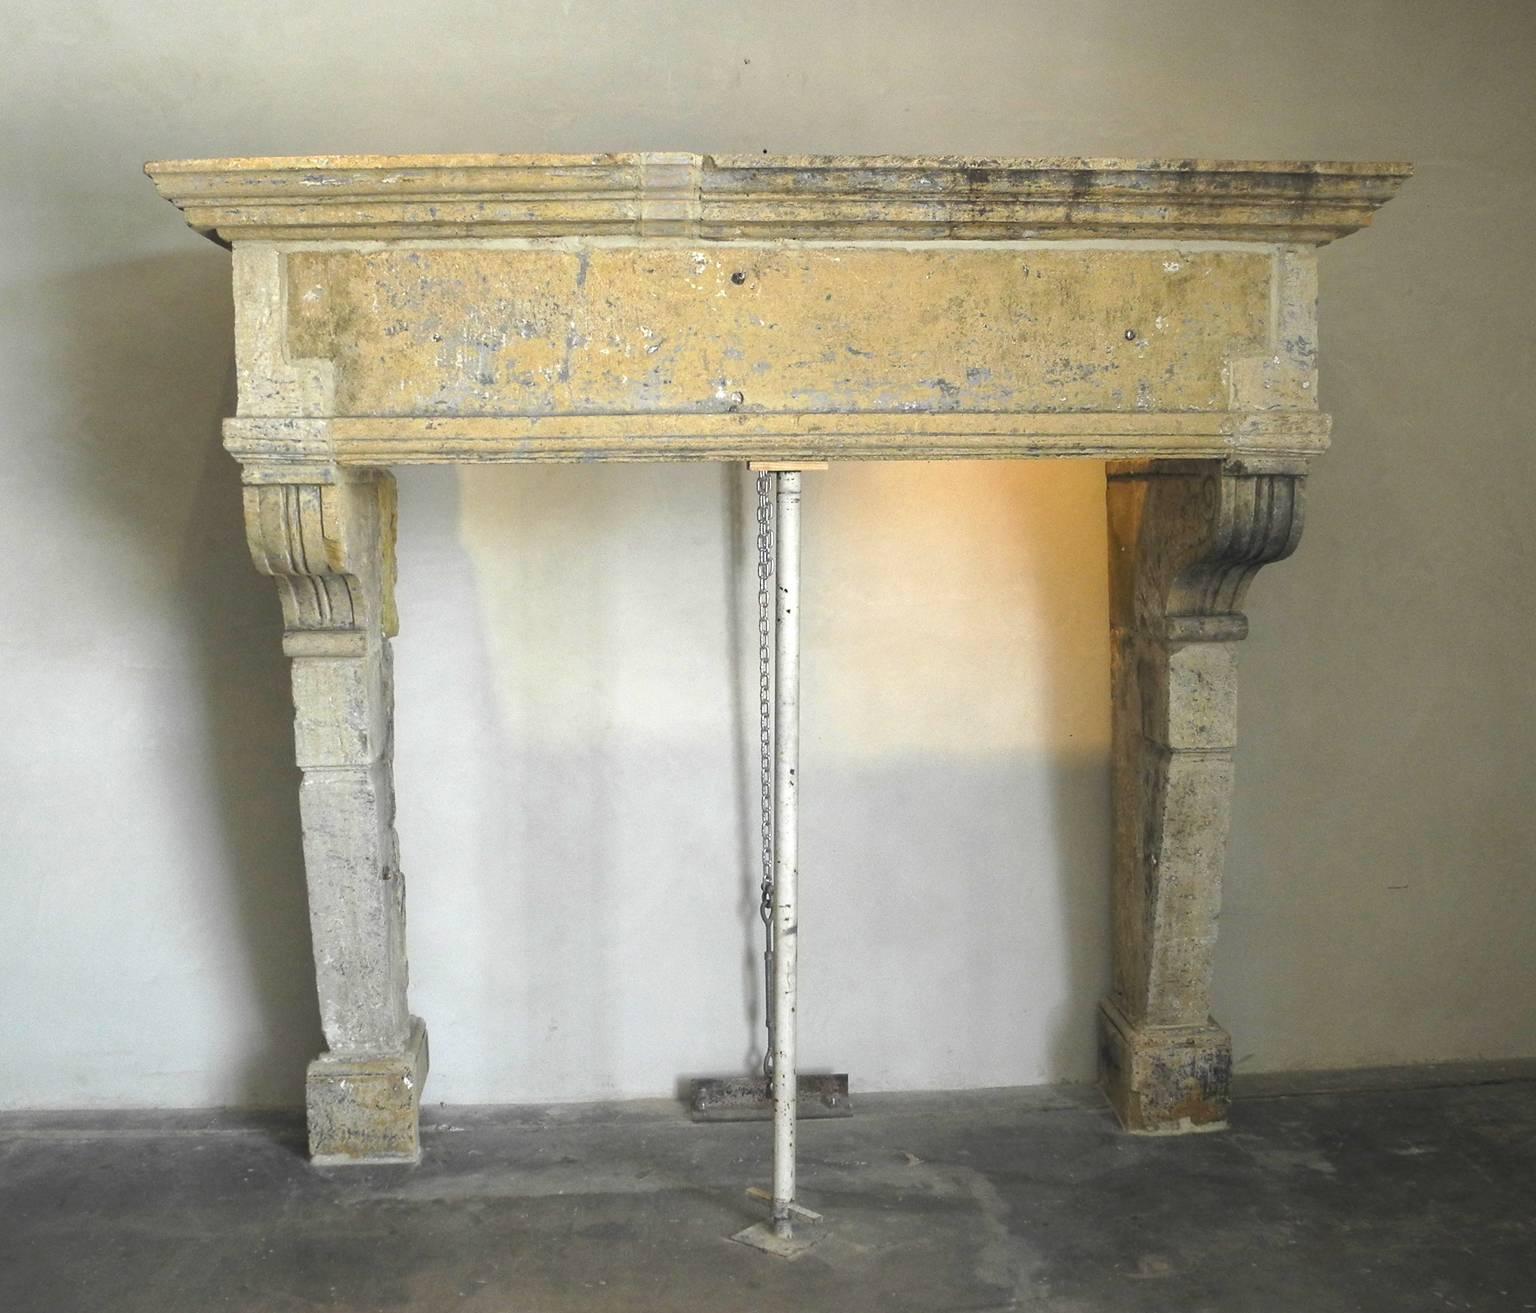 This is a very large stone mantel from early 17th century, France. It boasts a creamy patina and carved top, lintel, and legs. The carvings give it a very luxurious feel. It is the perfect centerpiece to any formal living room.